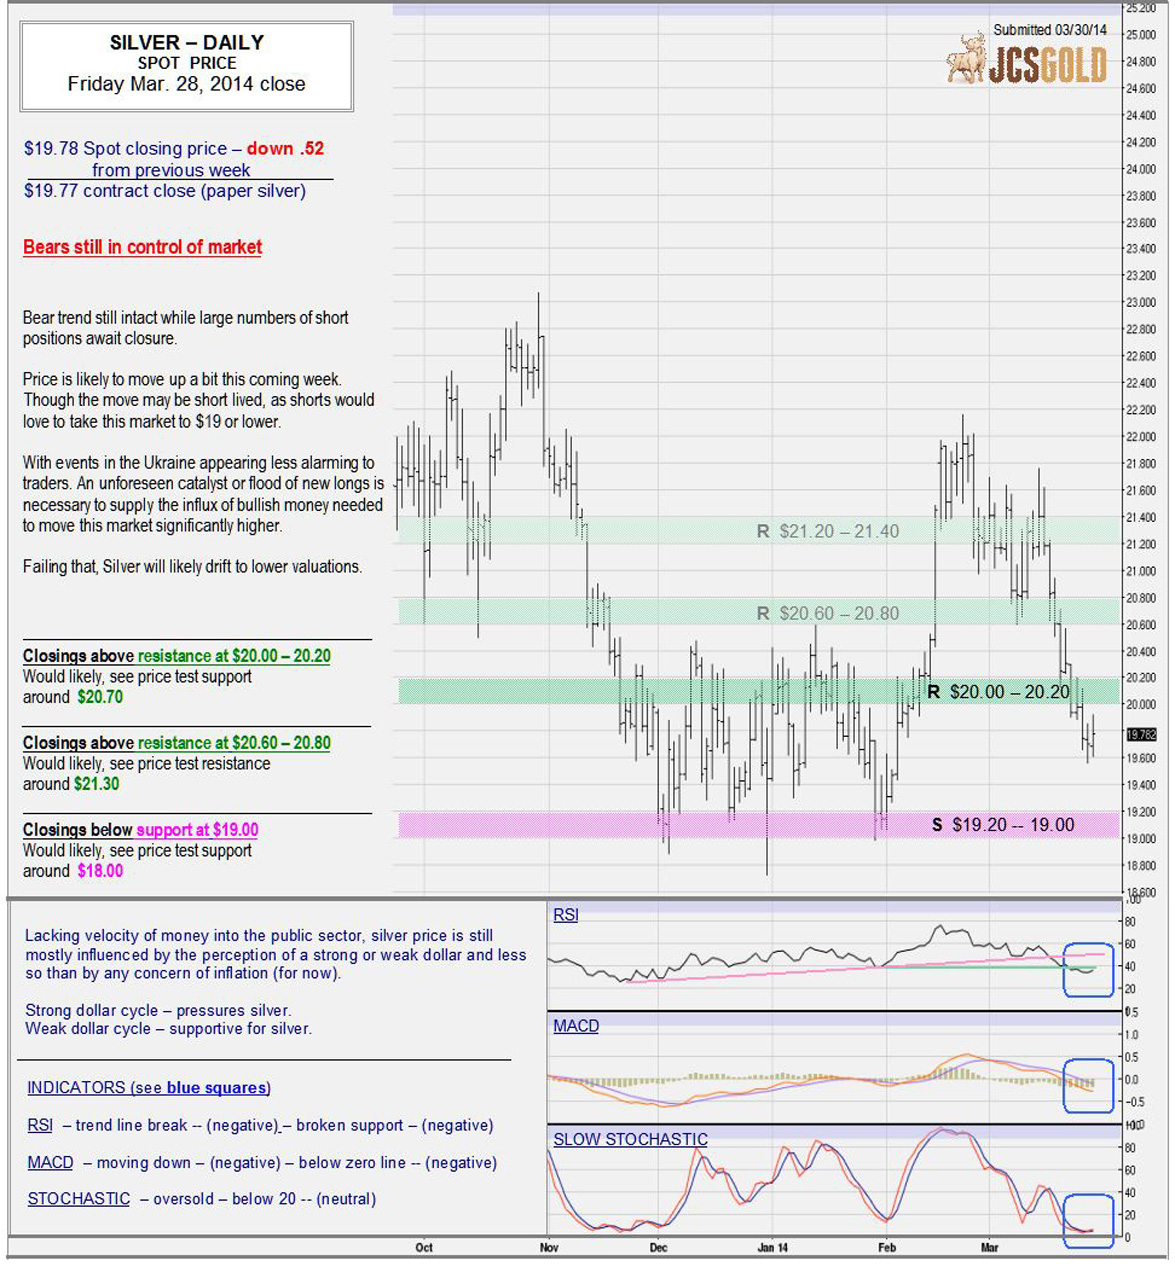 Mar 28, 2014 chart & commentary